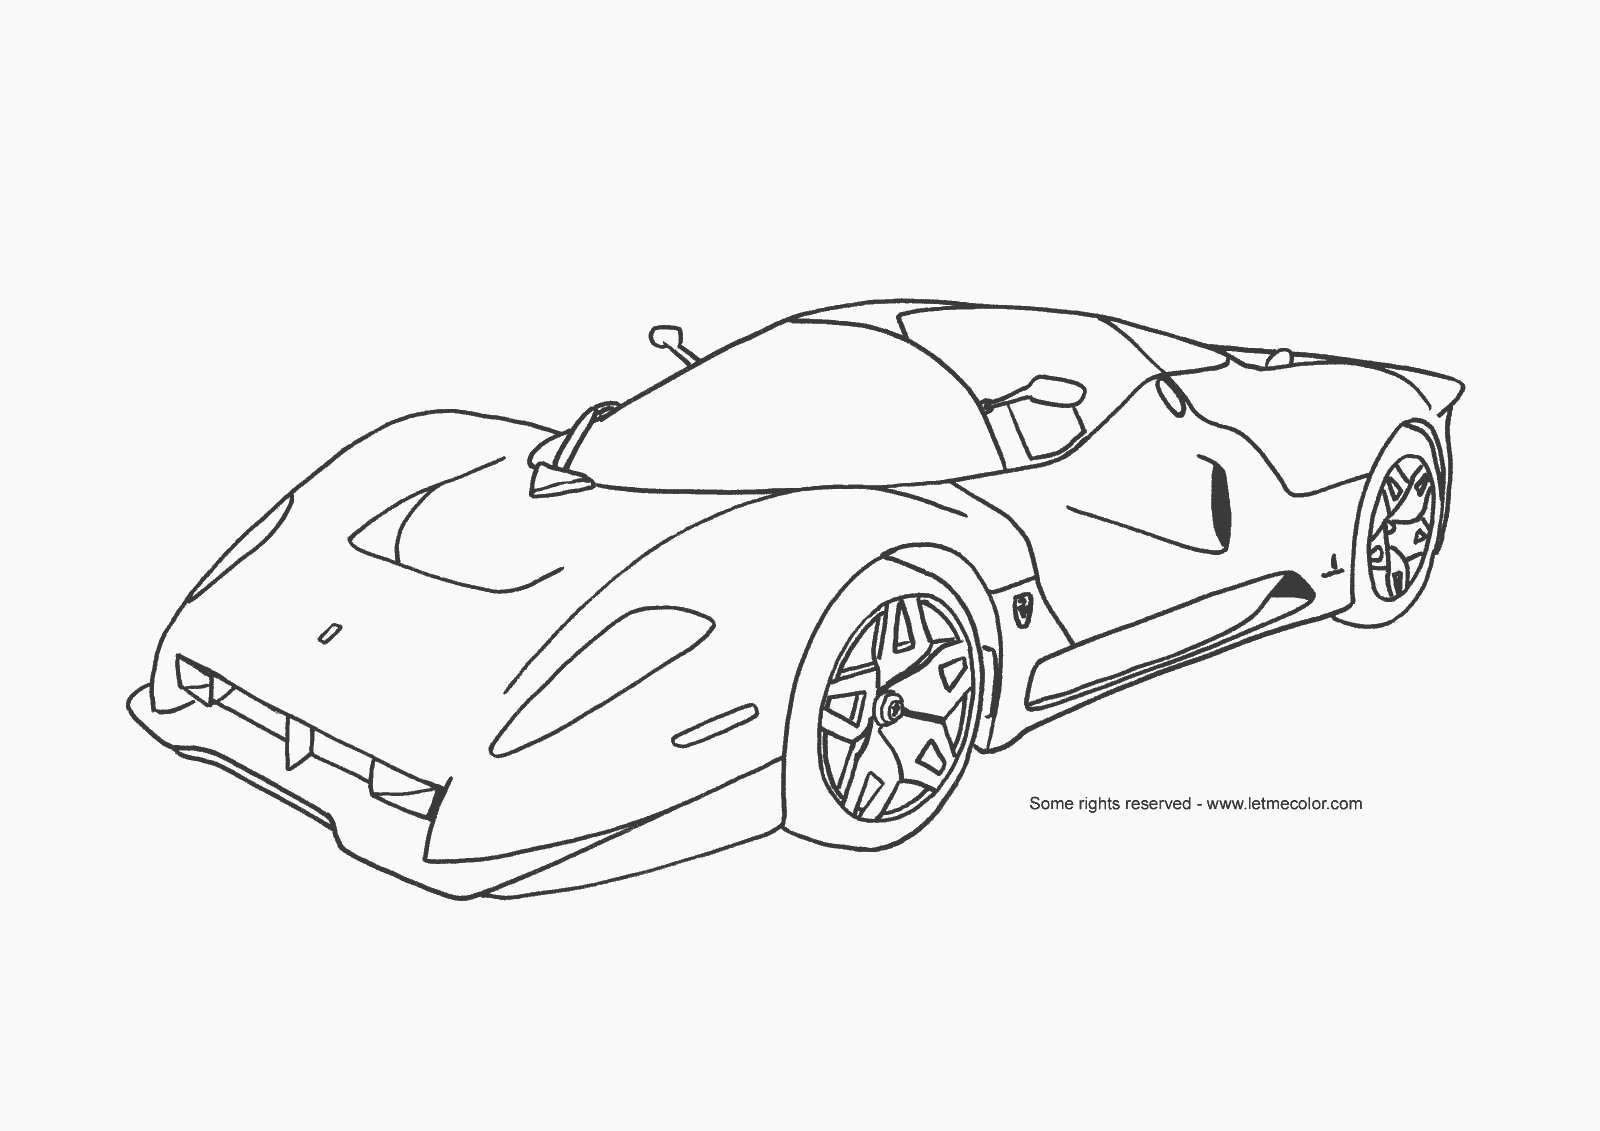 Coloring, Race Cars and Sports cars 